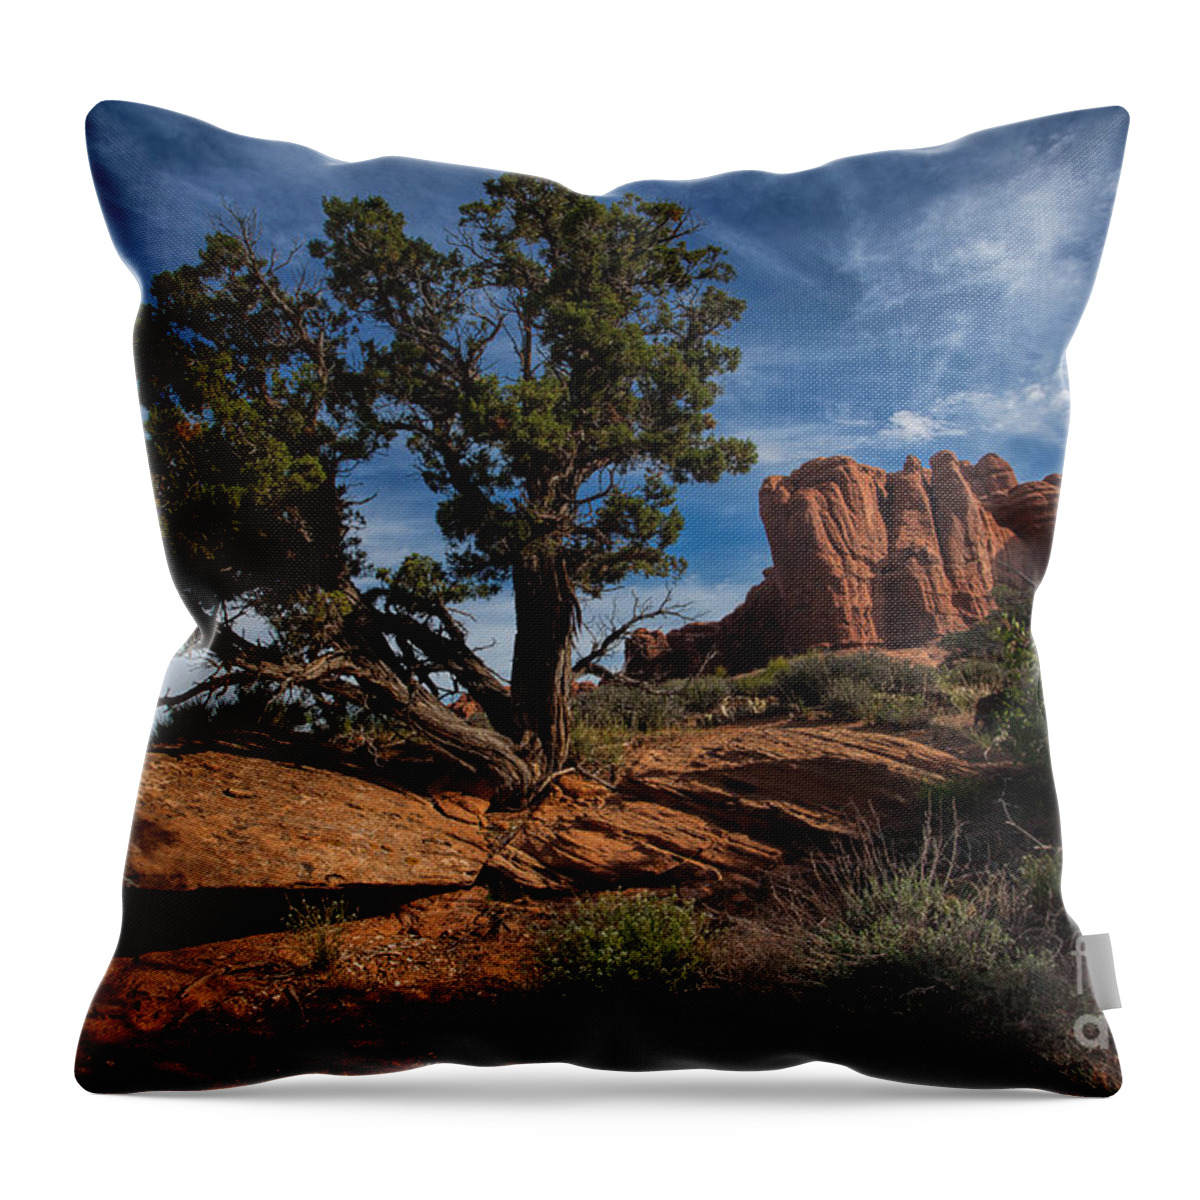 Utah Throw Pillow featuring the photograph The Canyon Trail by Jim Garrison